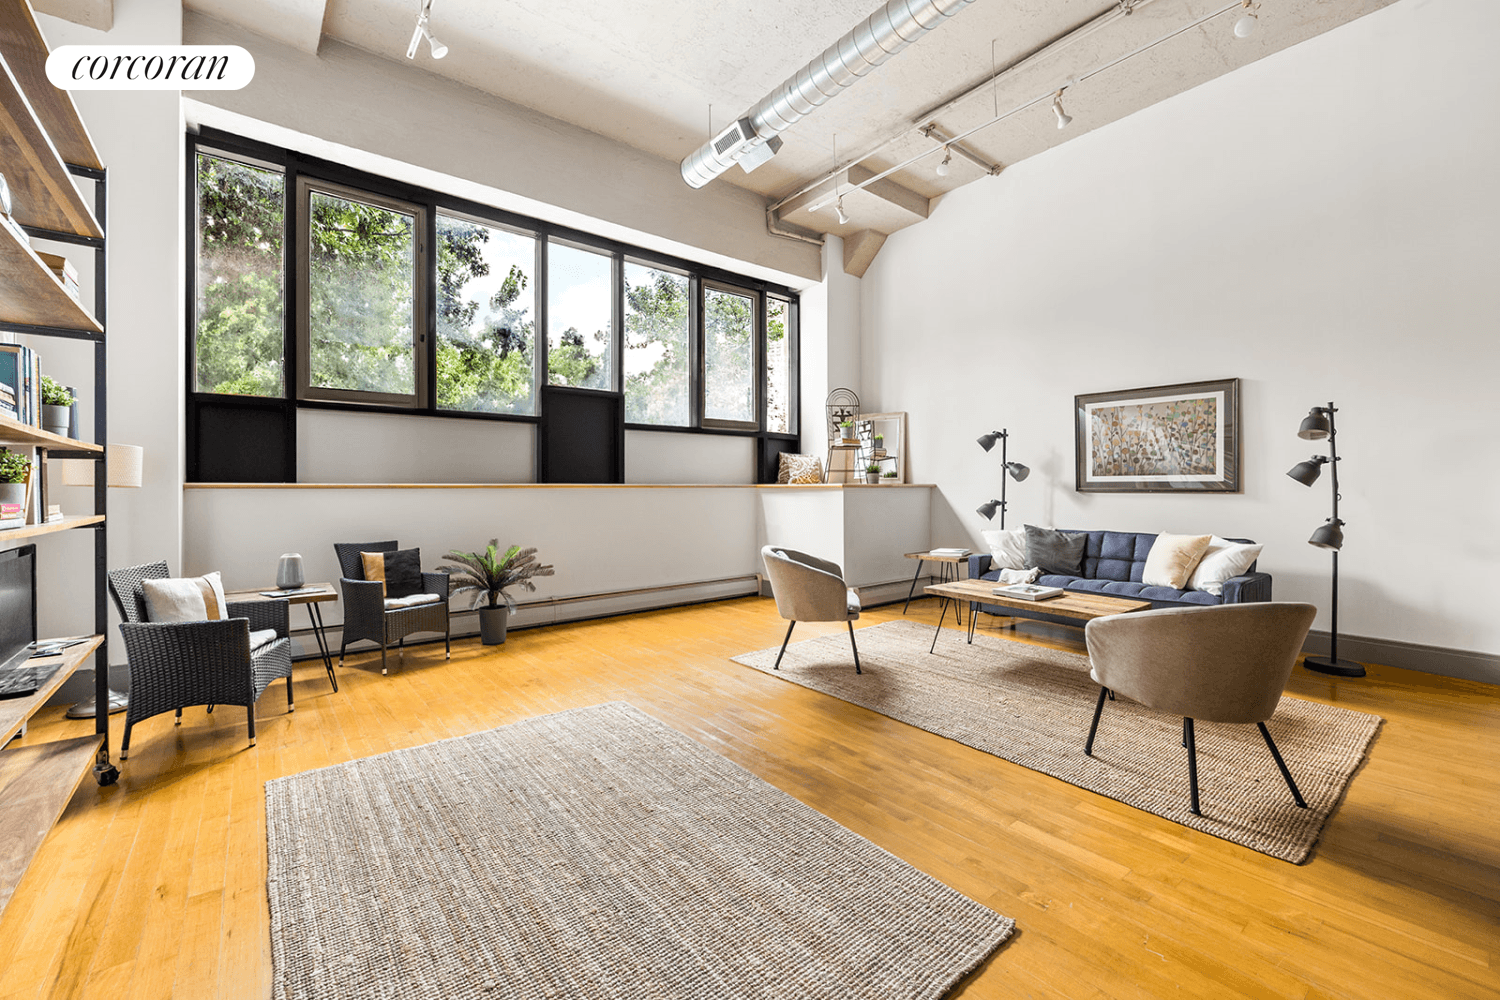 LARGE, LIGHT, LOFTY ! Nearly 1000 sq ft of beautiful living space in this very special bi level NEWSWALK loft.